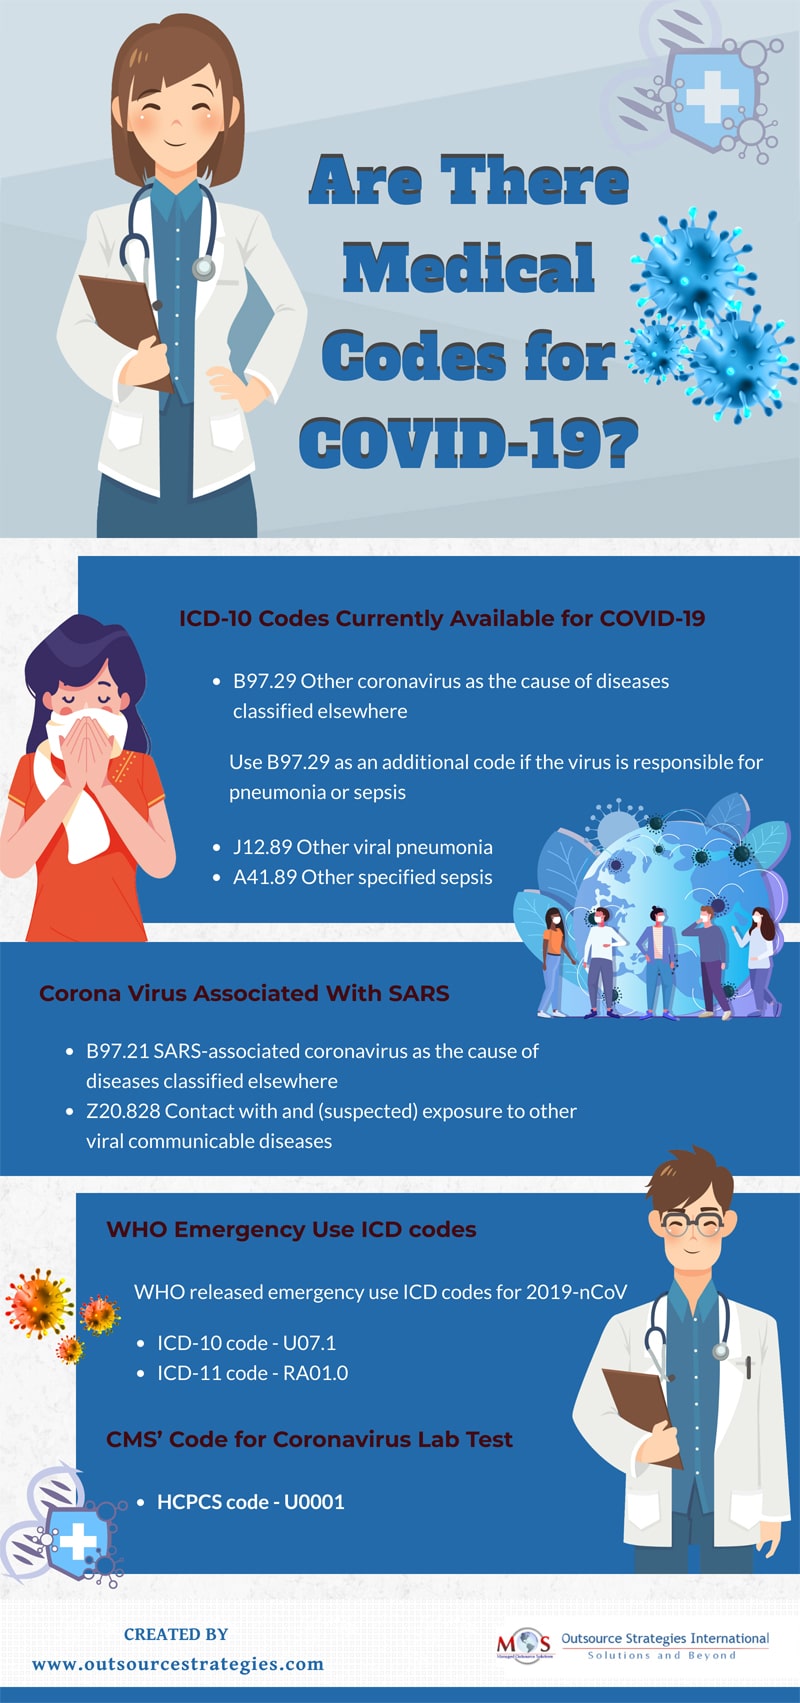 Medical Codes for COVID-19